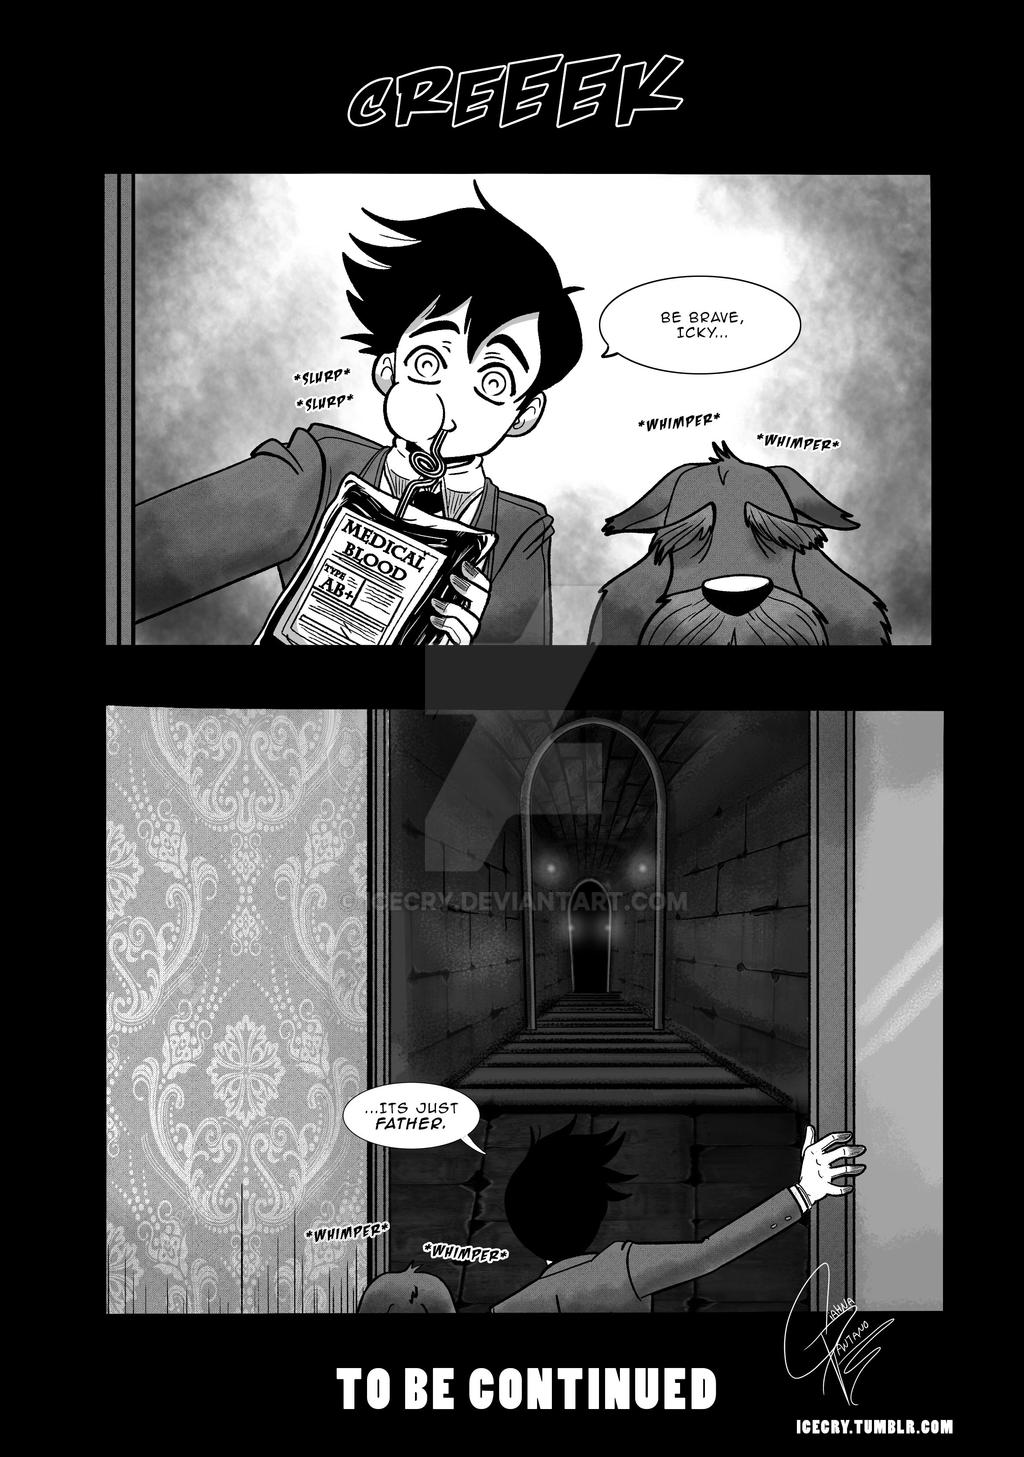 HELLSING THE BENEDICTION CH:3 9TH SUNRISE PG4 by Icecry on DeviantArt